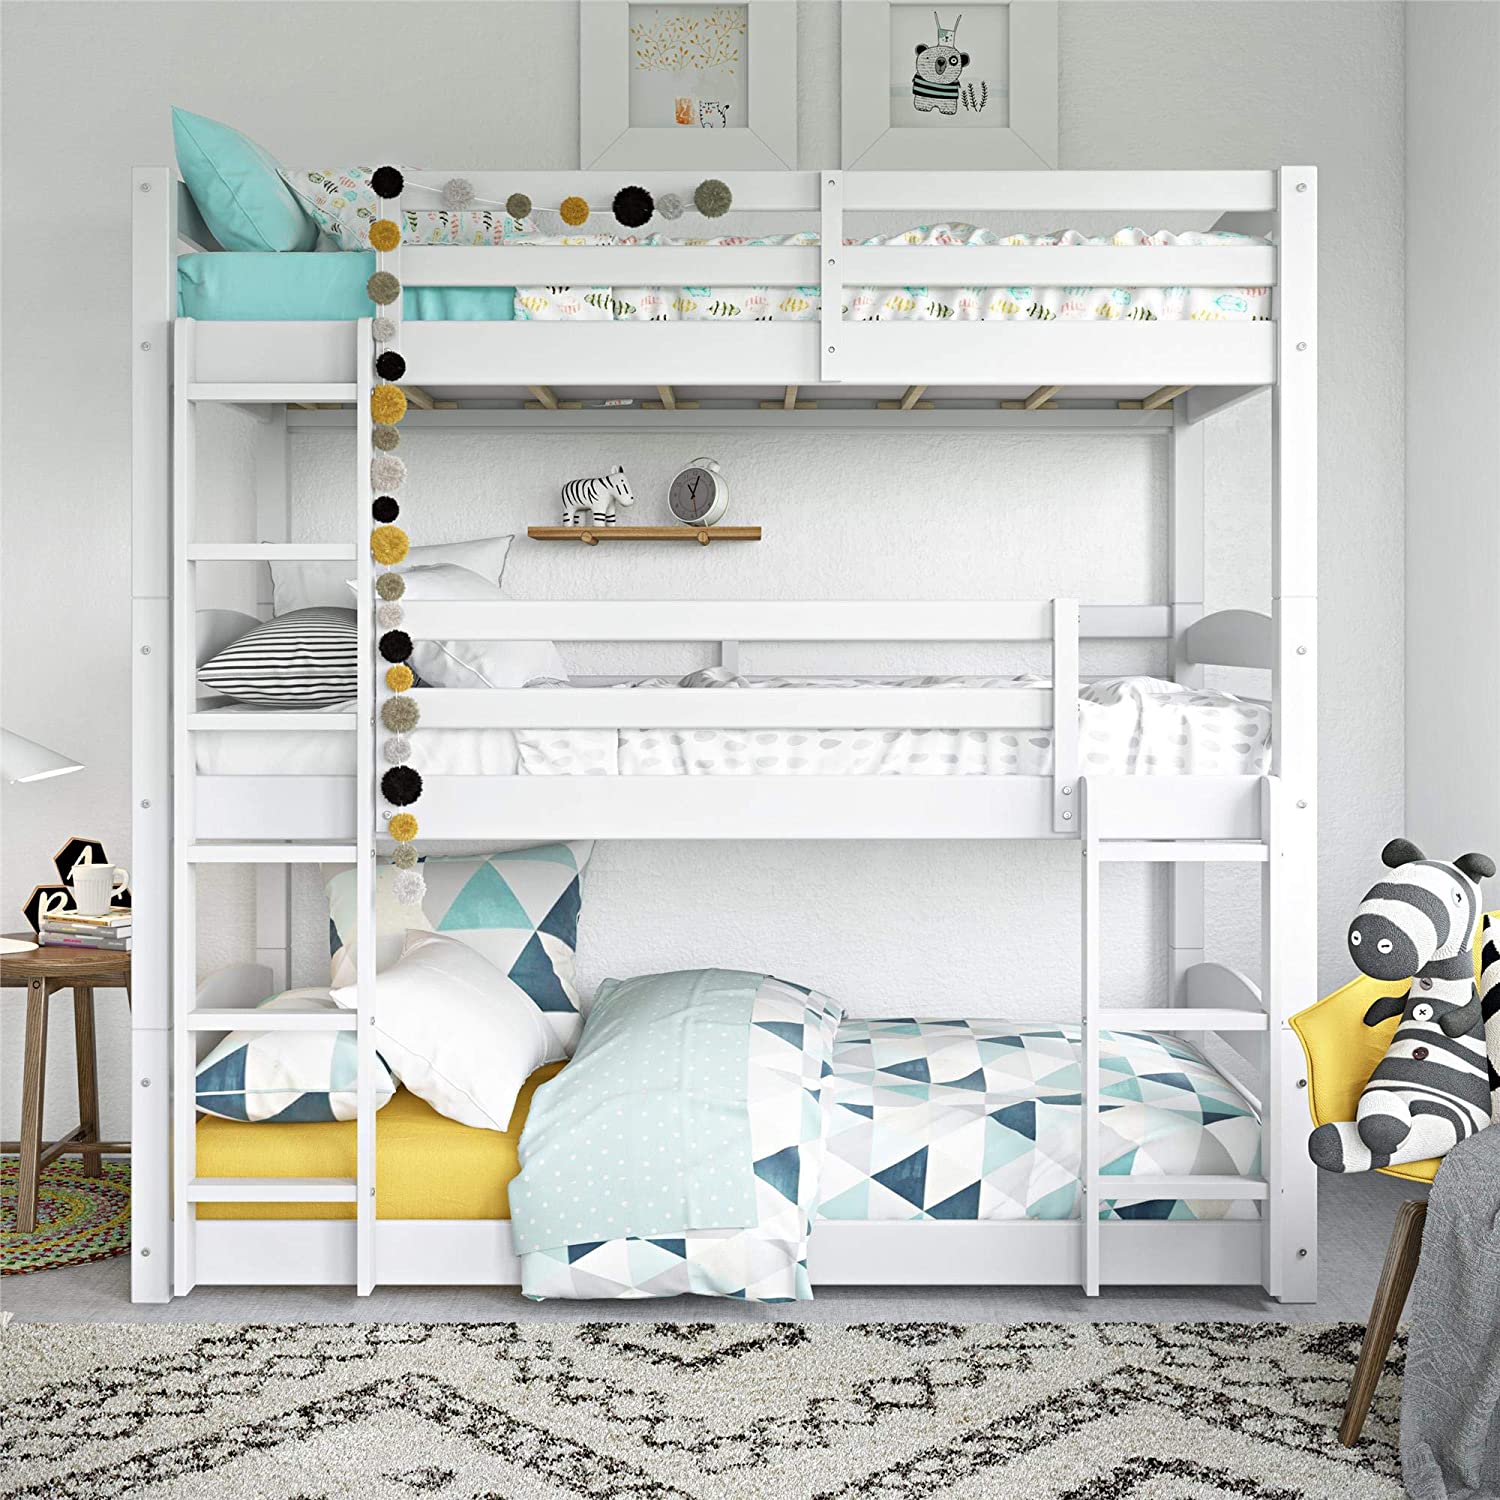 26 Bunk Beds You Ll Want For Yourself, Fun Bunk Beds